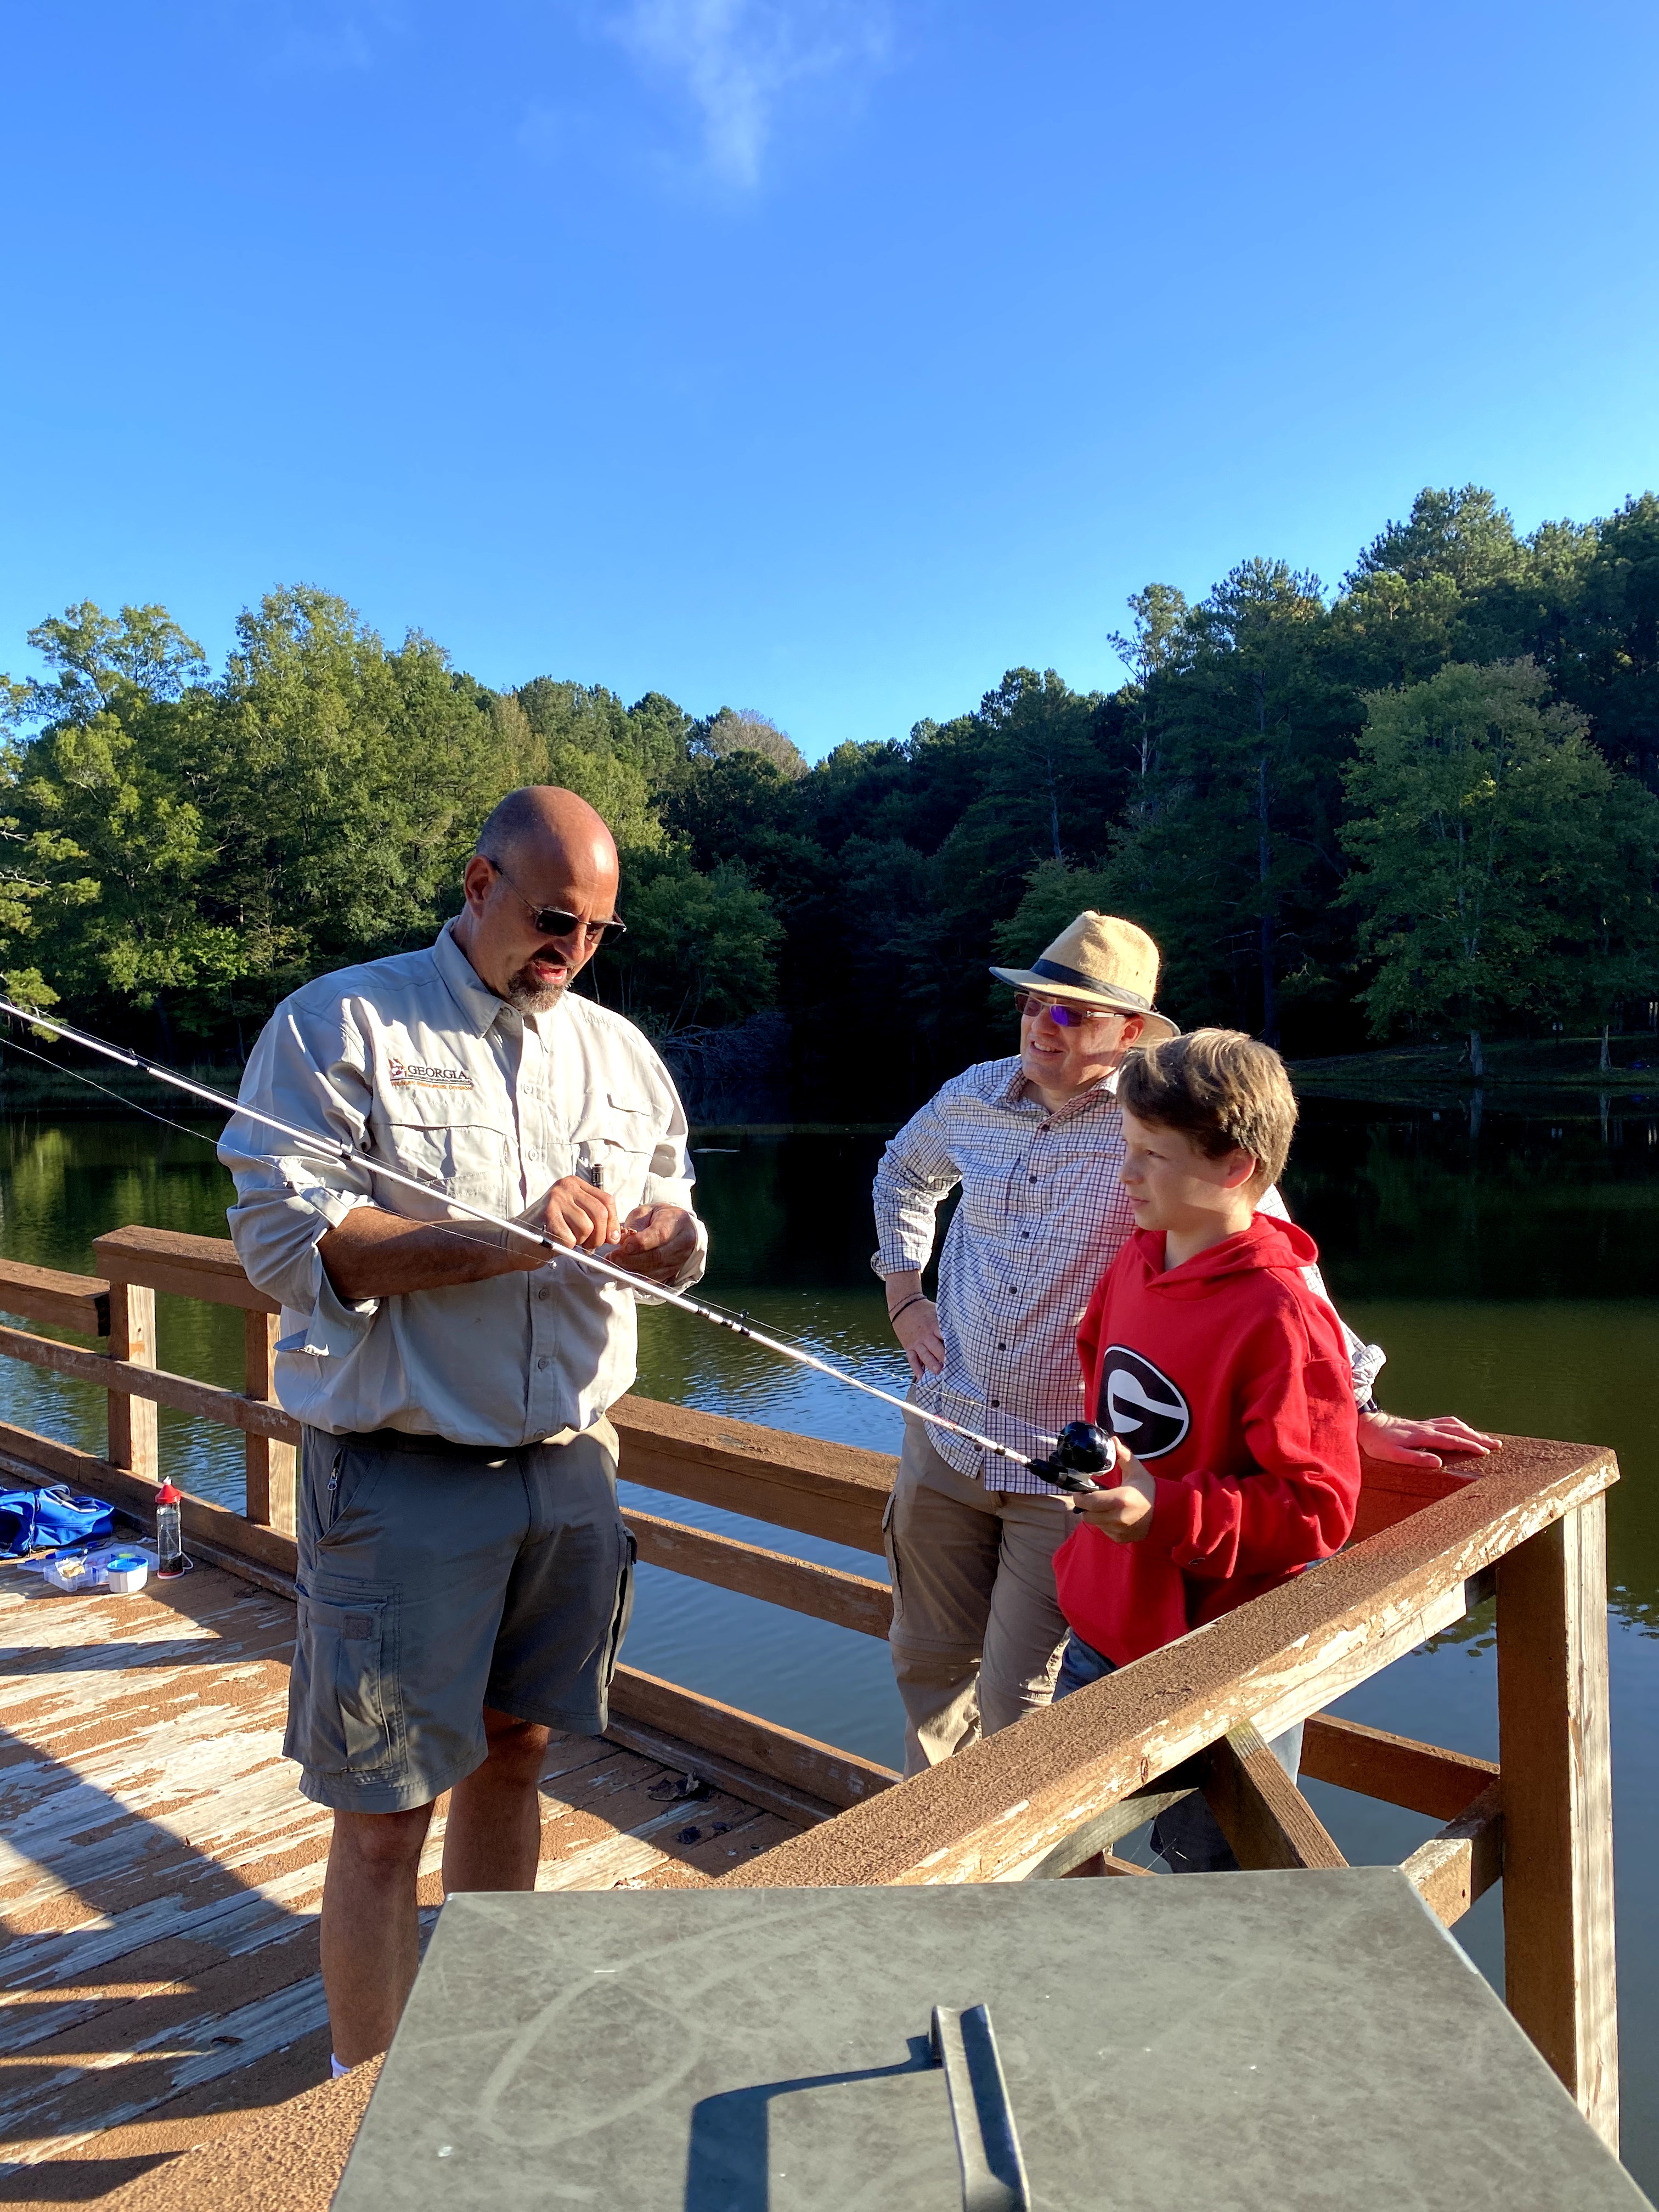 A boy and two adult men stand on a dock learning how to attach a fishing hook onto a pole.